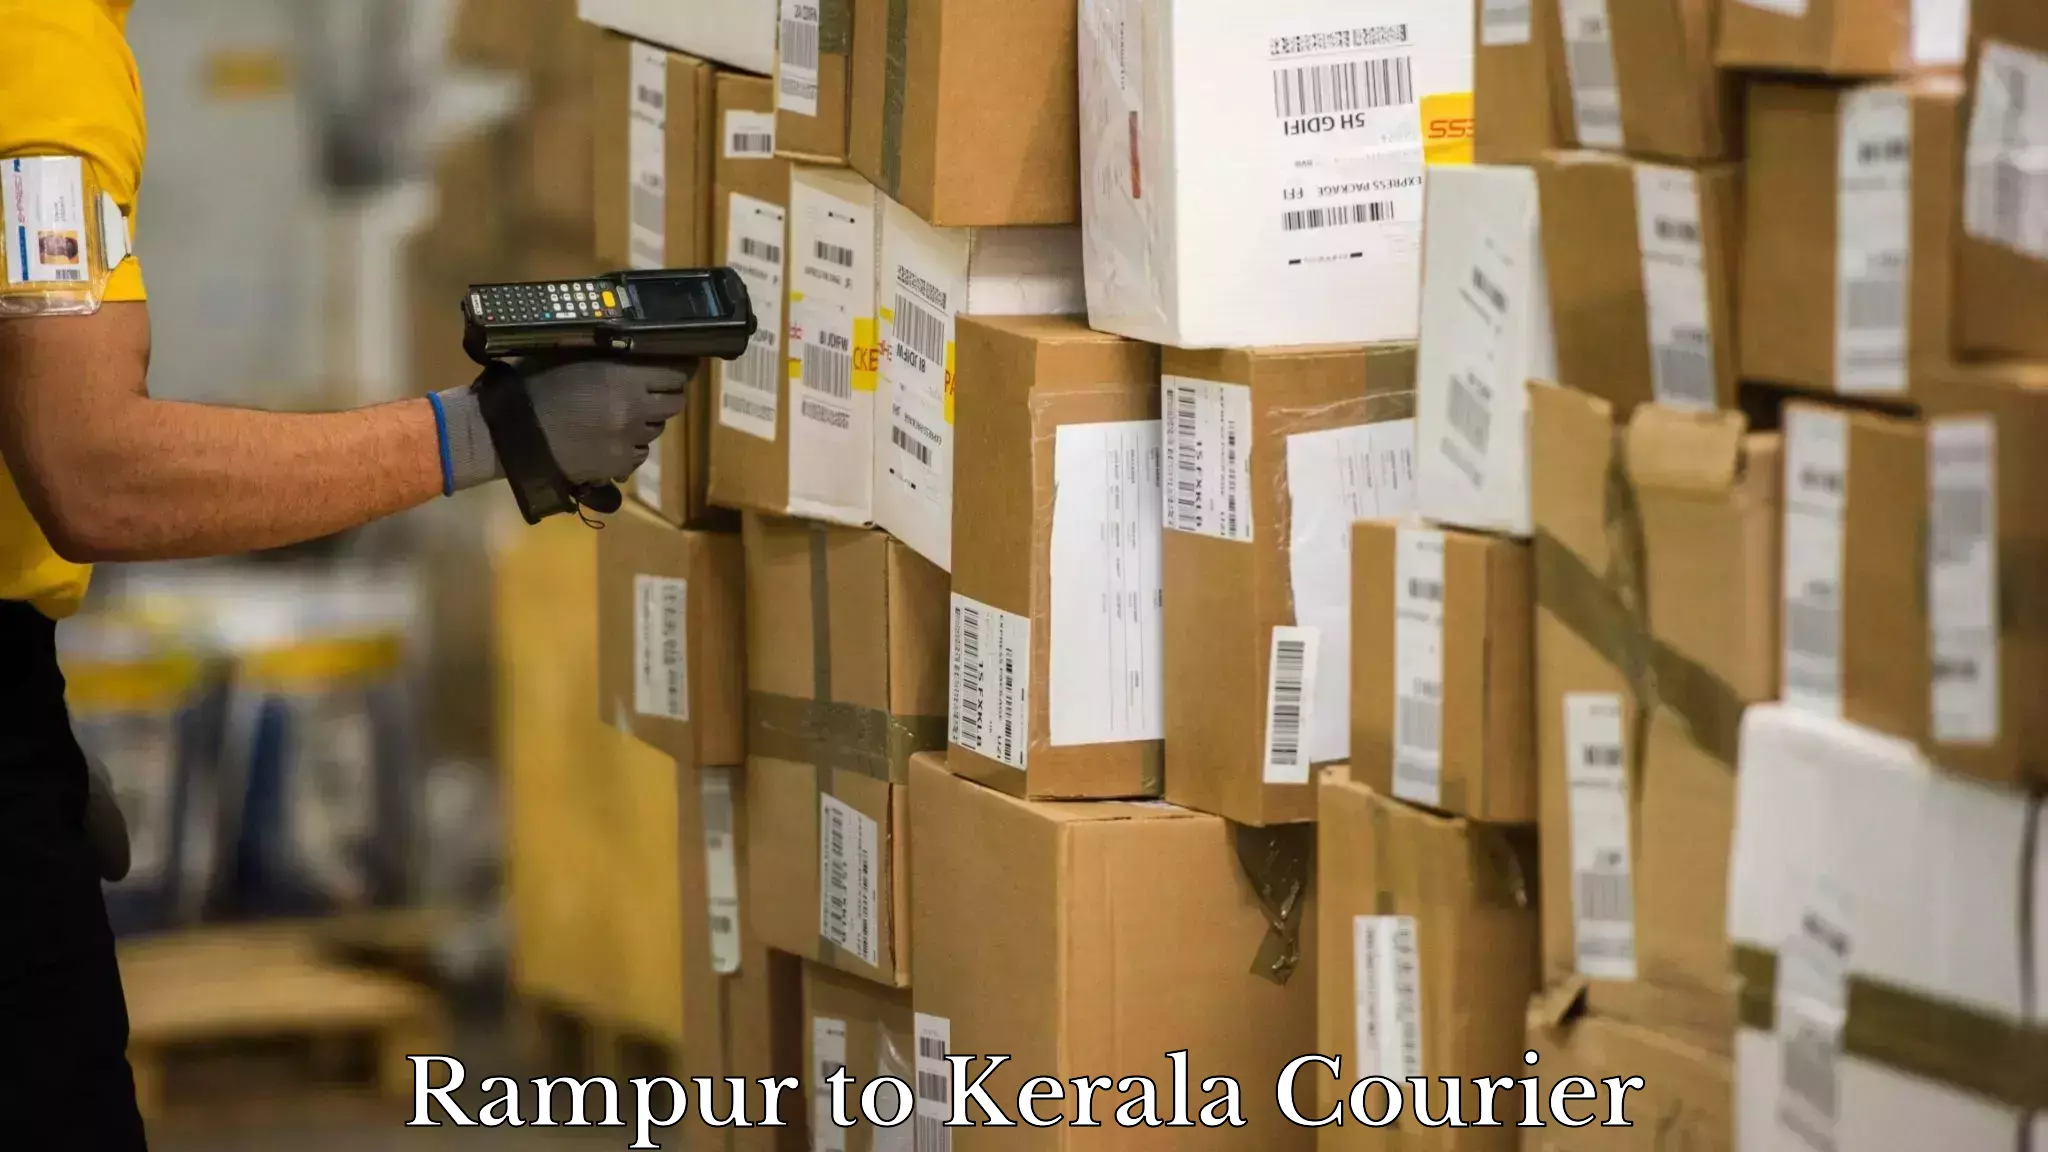 Subscription-based courier Rampur to Kerala